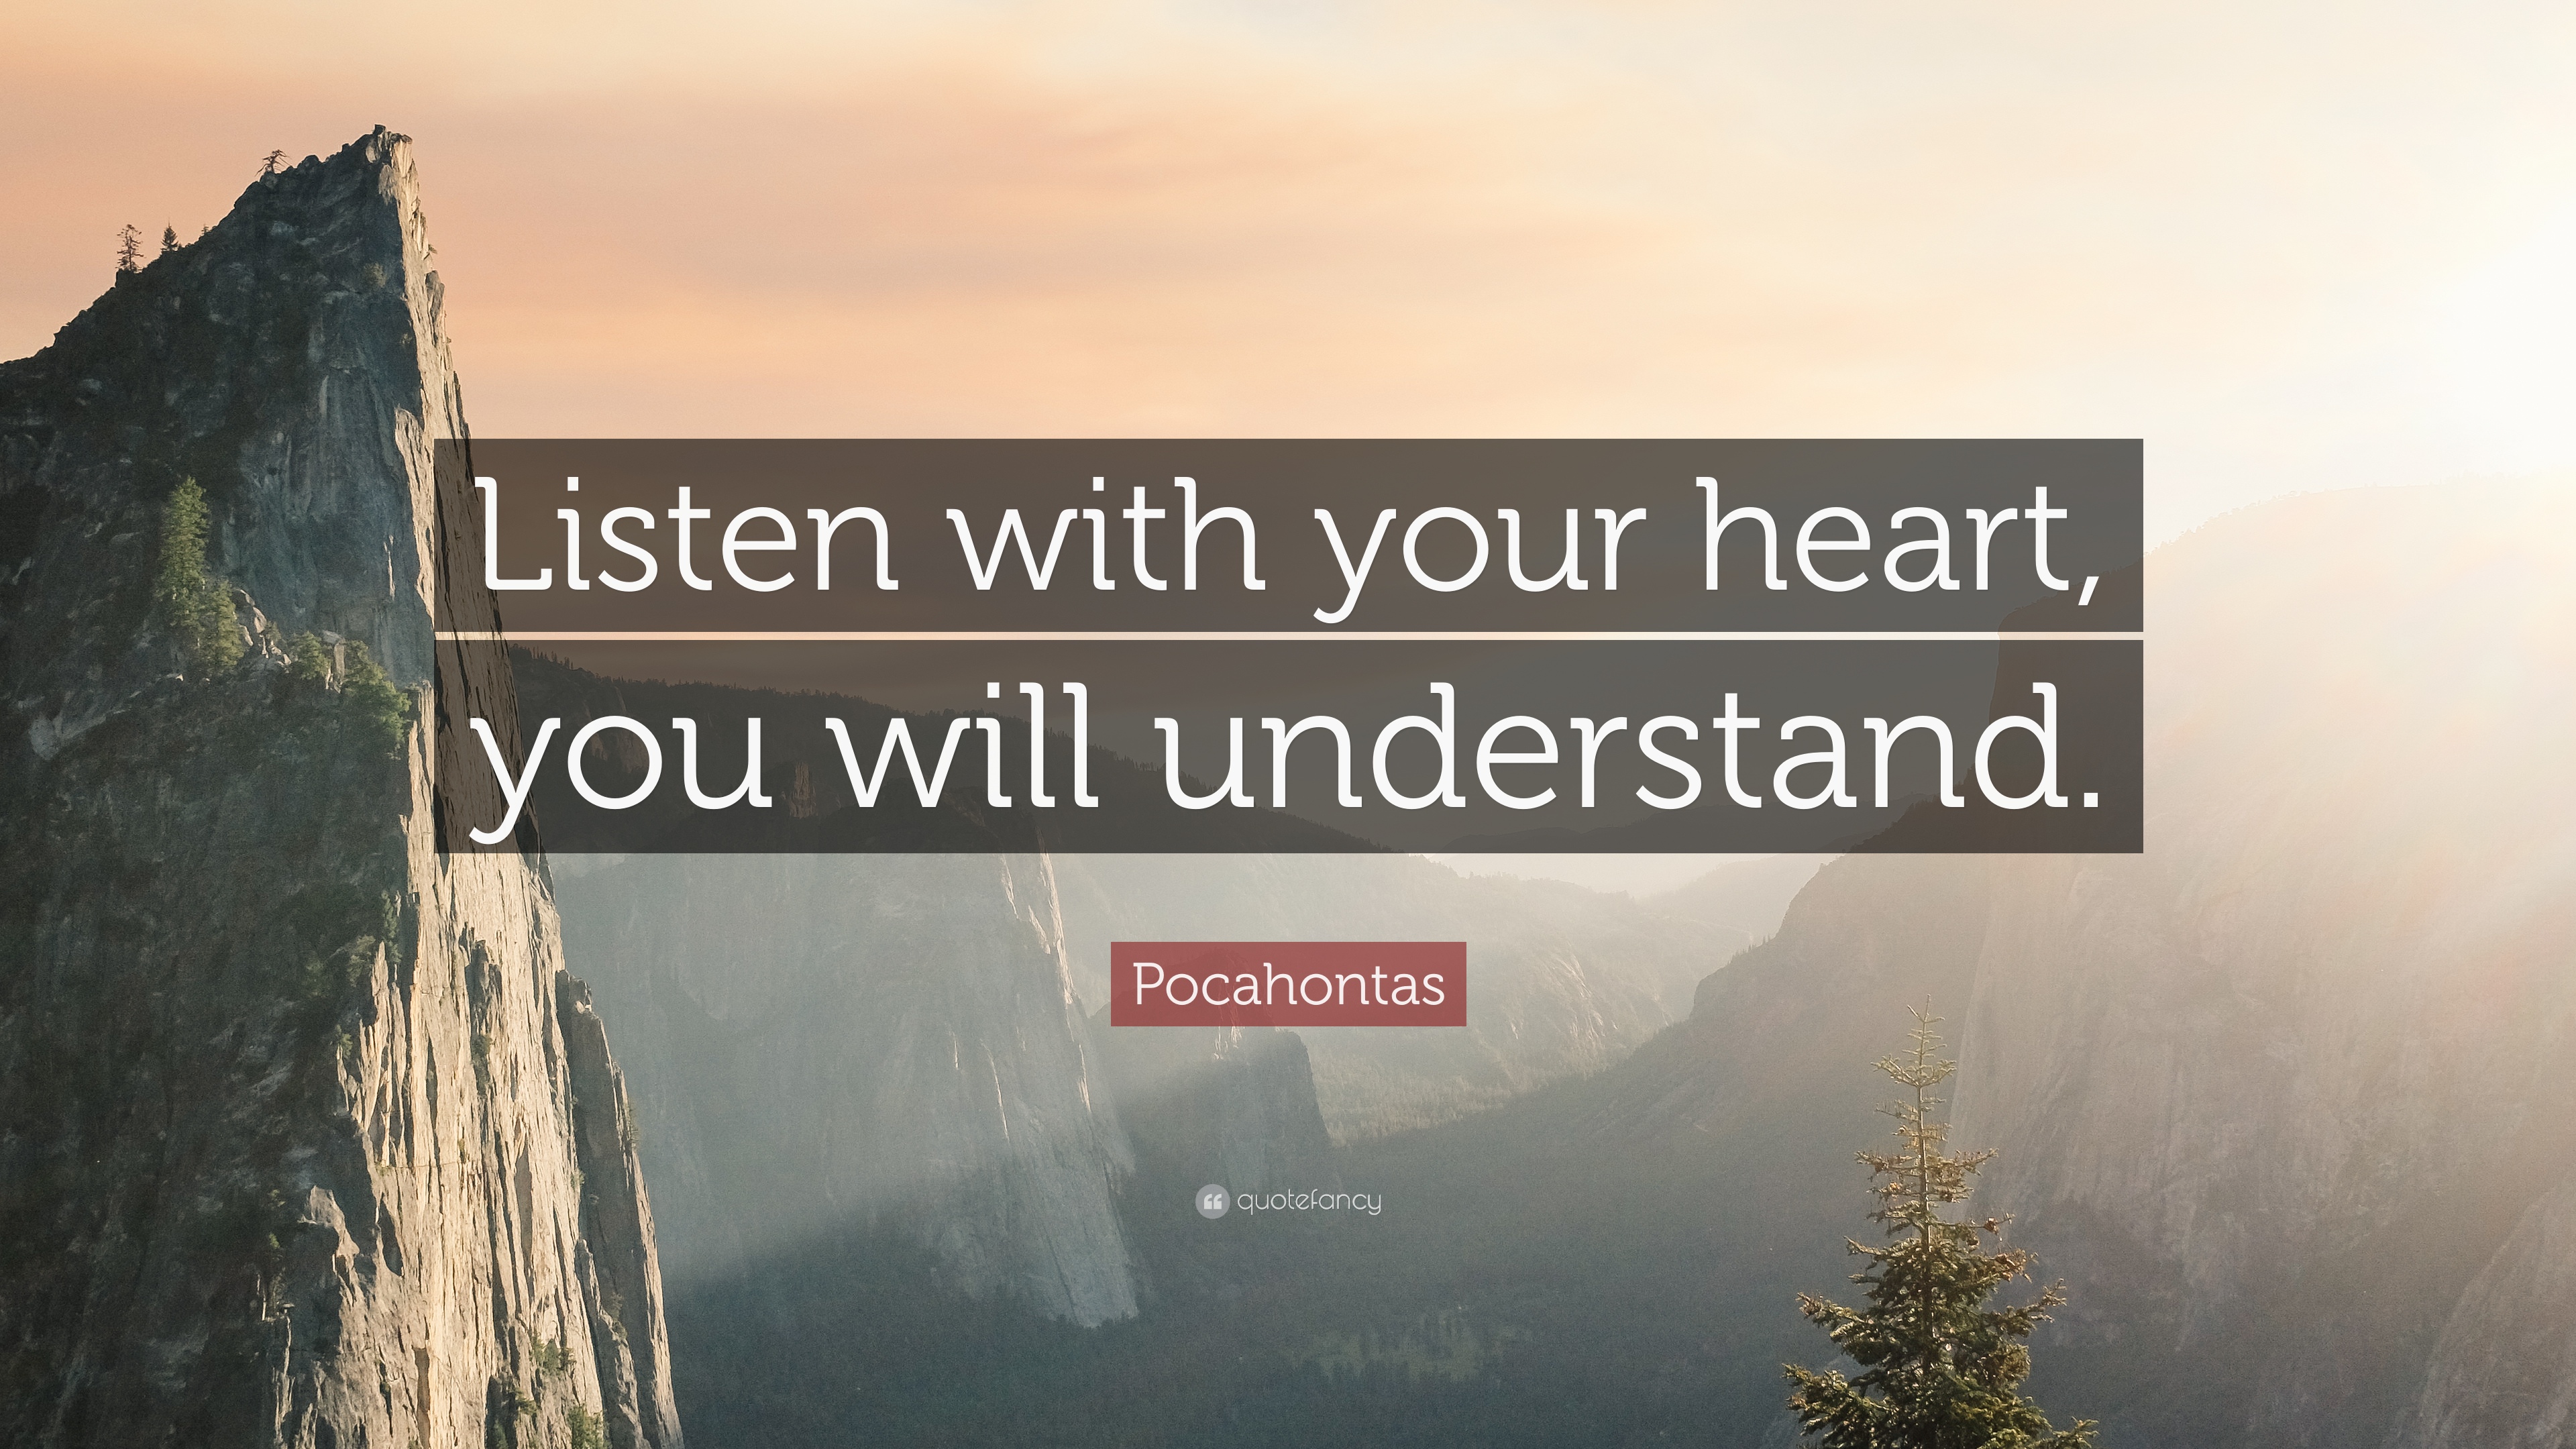 Pocahontas Quote: “Listen with your heart, you will understand.” 12